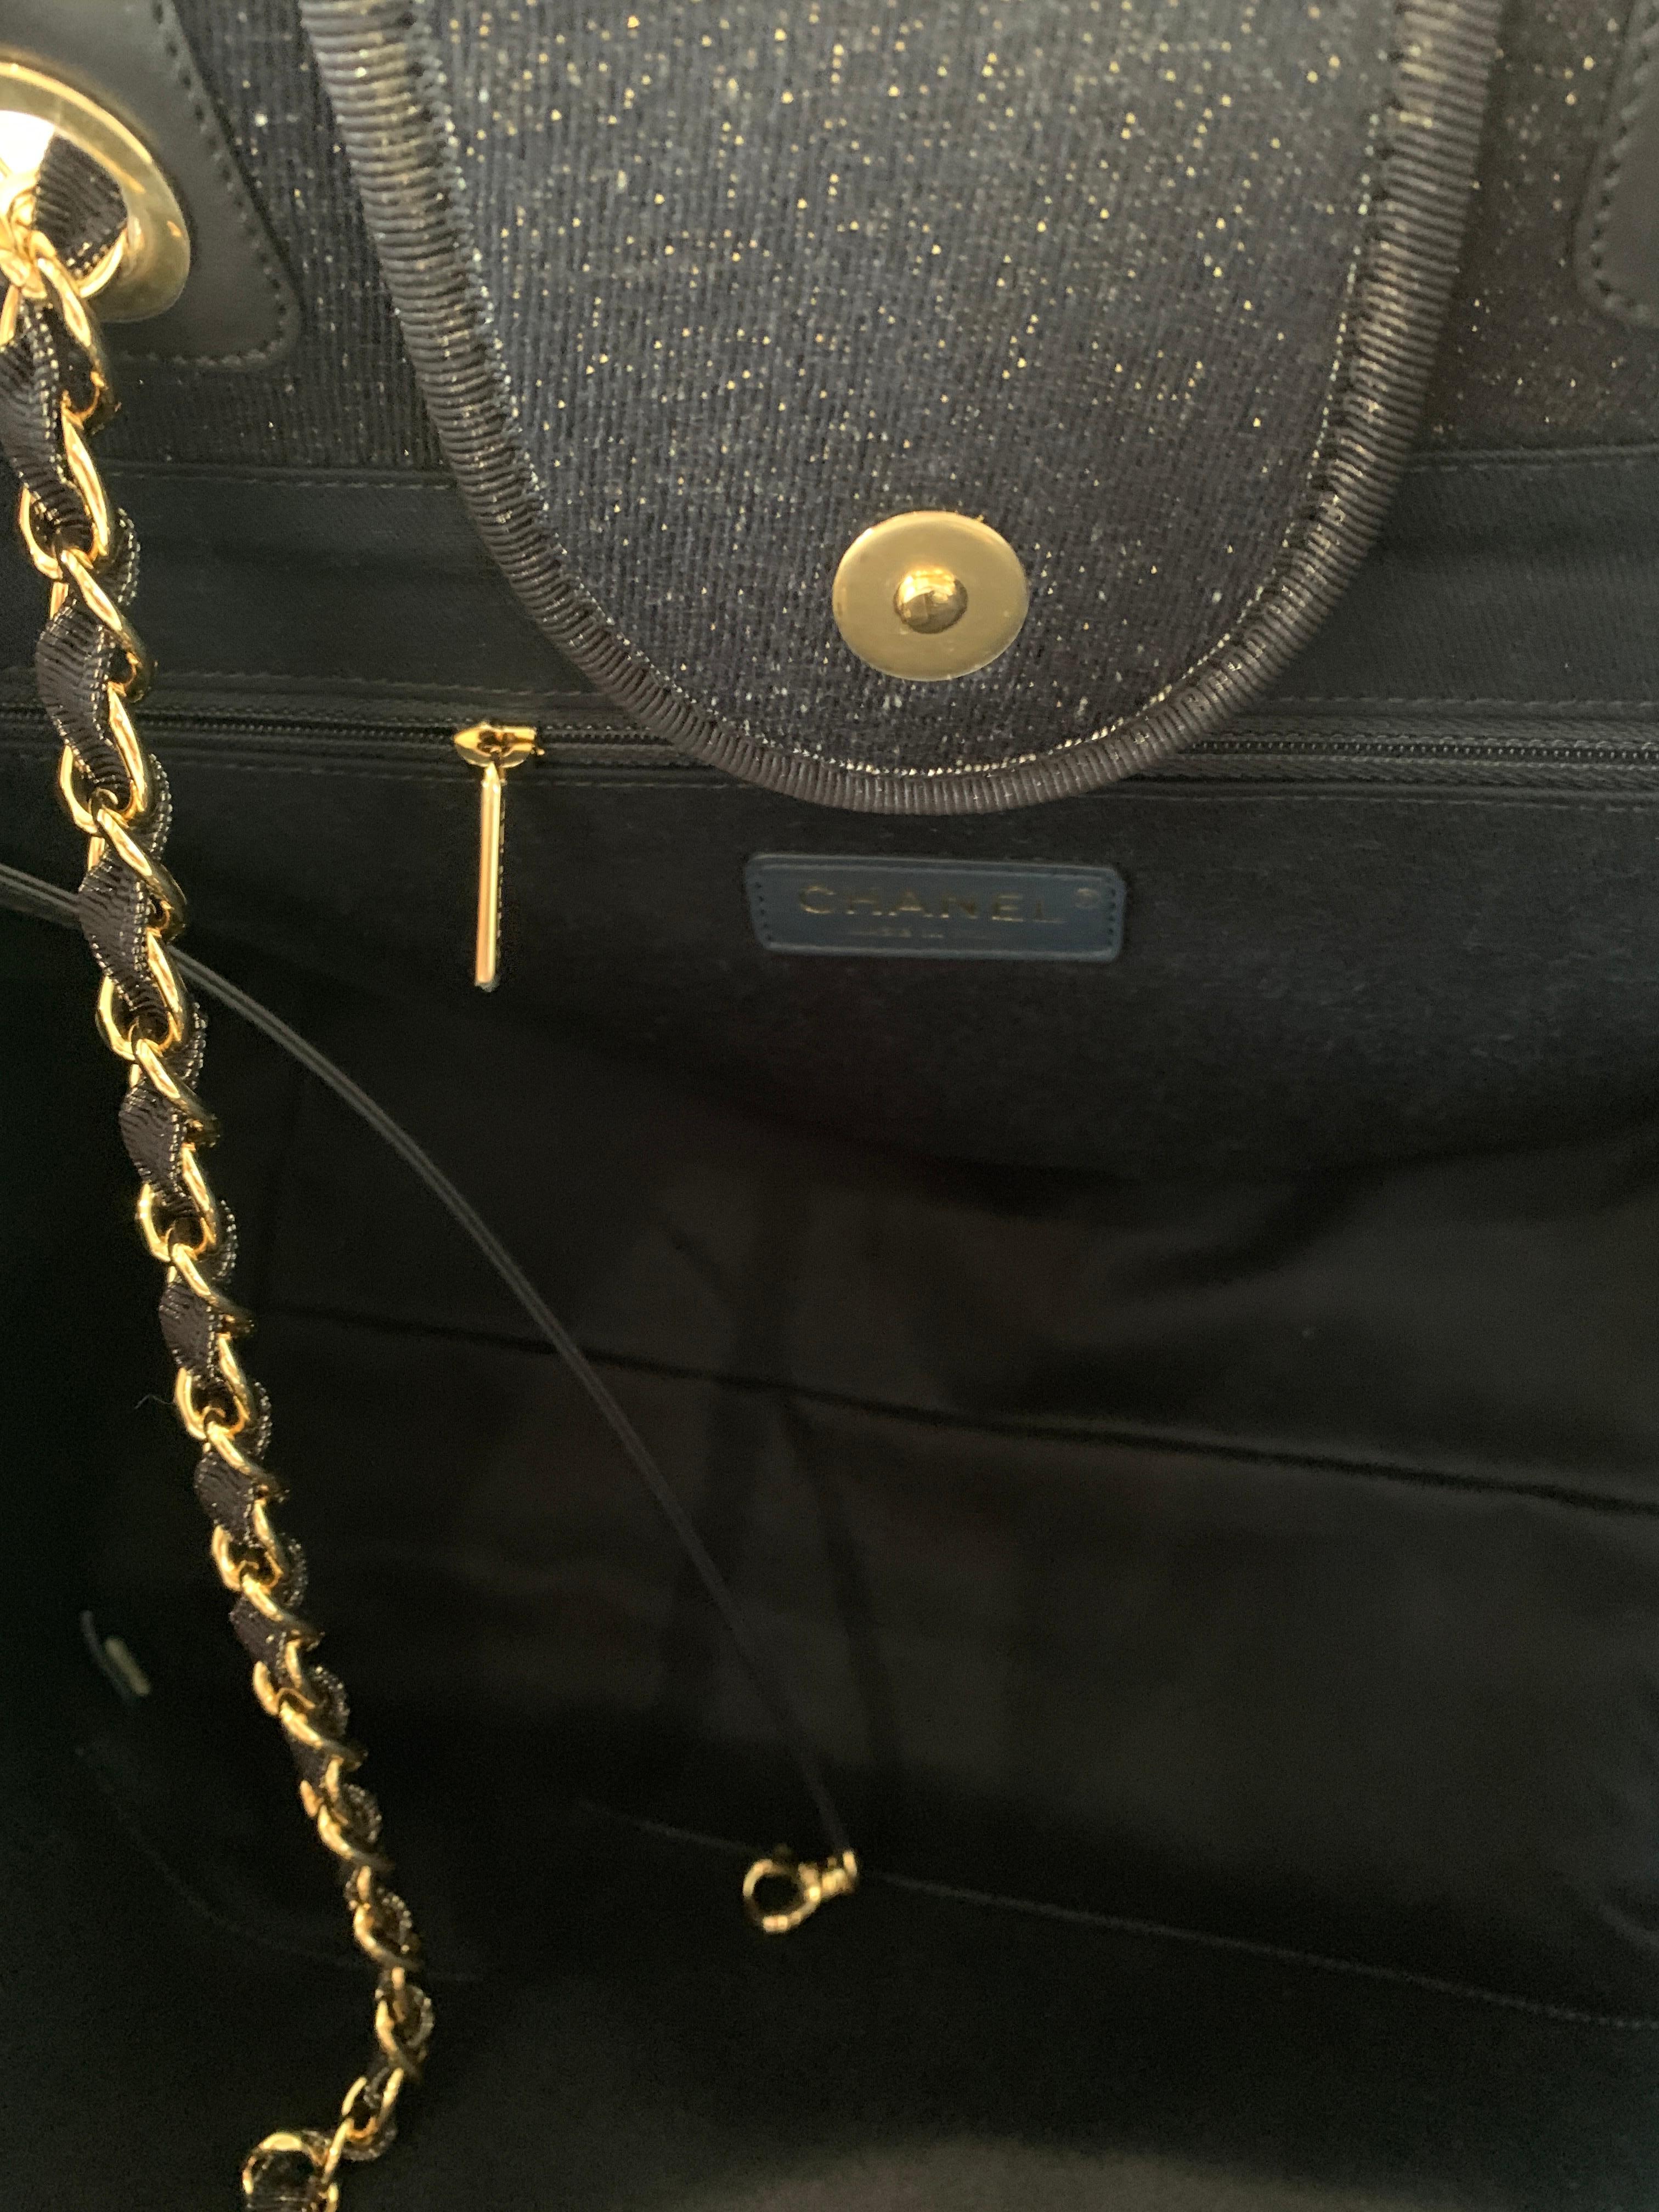 Chanel
The Deauville Tote
Soldout in stores
Navy with Gold Metallic threads running through
This is the Large tote
Purchased by me from the Chanel Boutique. Comes with Dustcover and Box
Beautiful stunning combination

From pre Fall 2019
Mixed Fibers